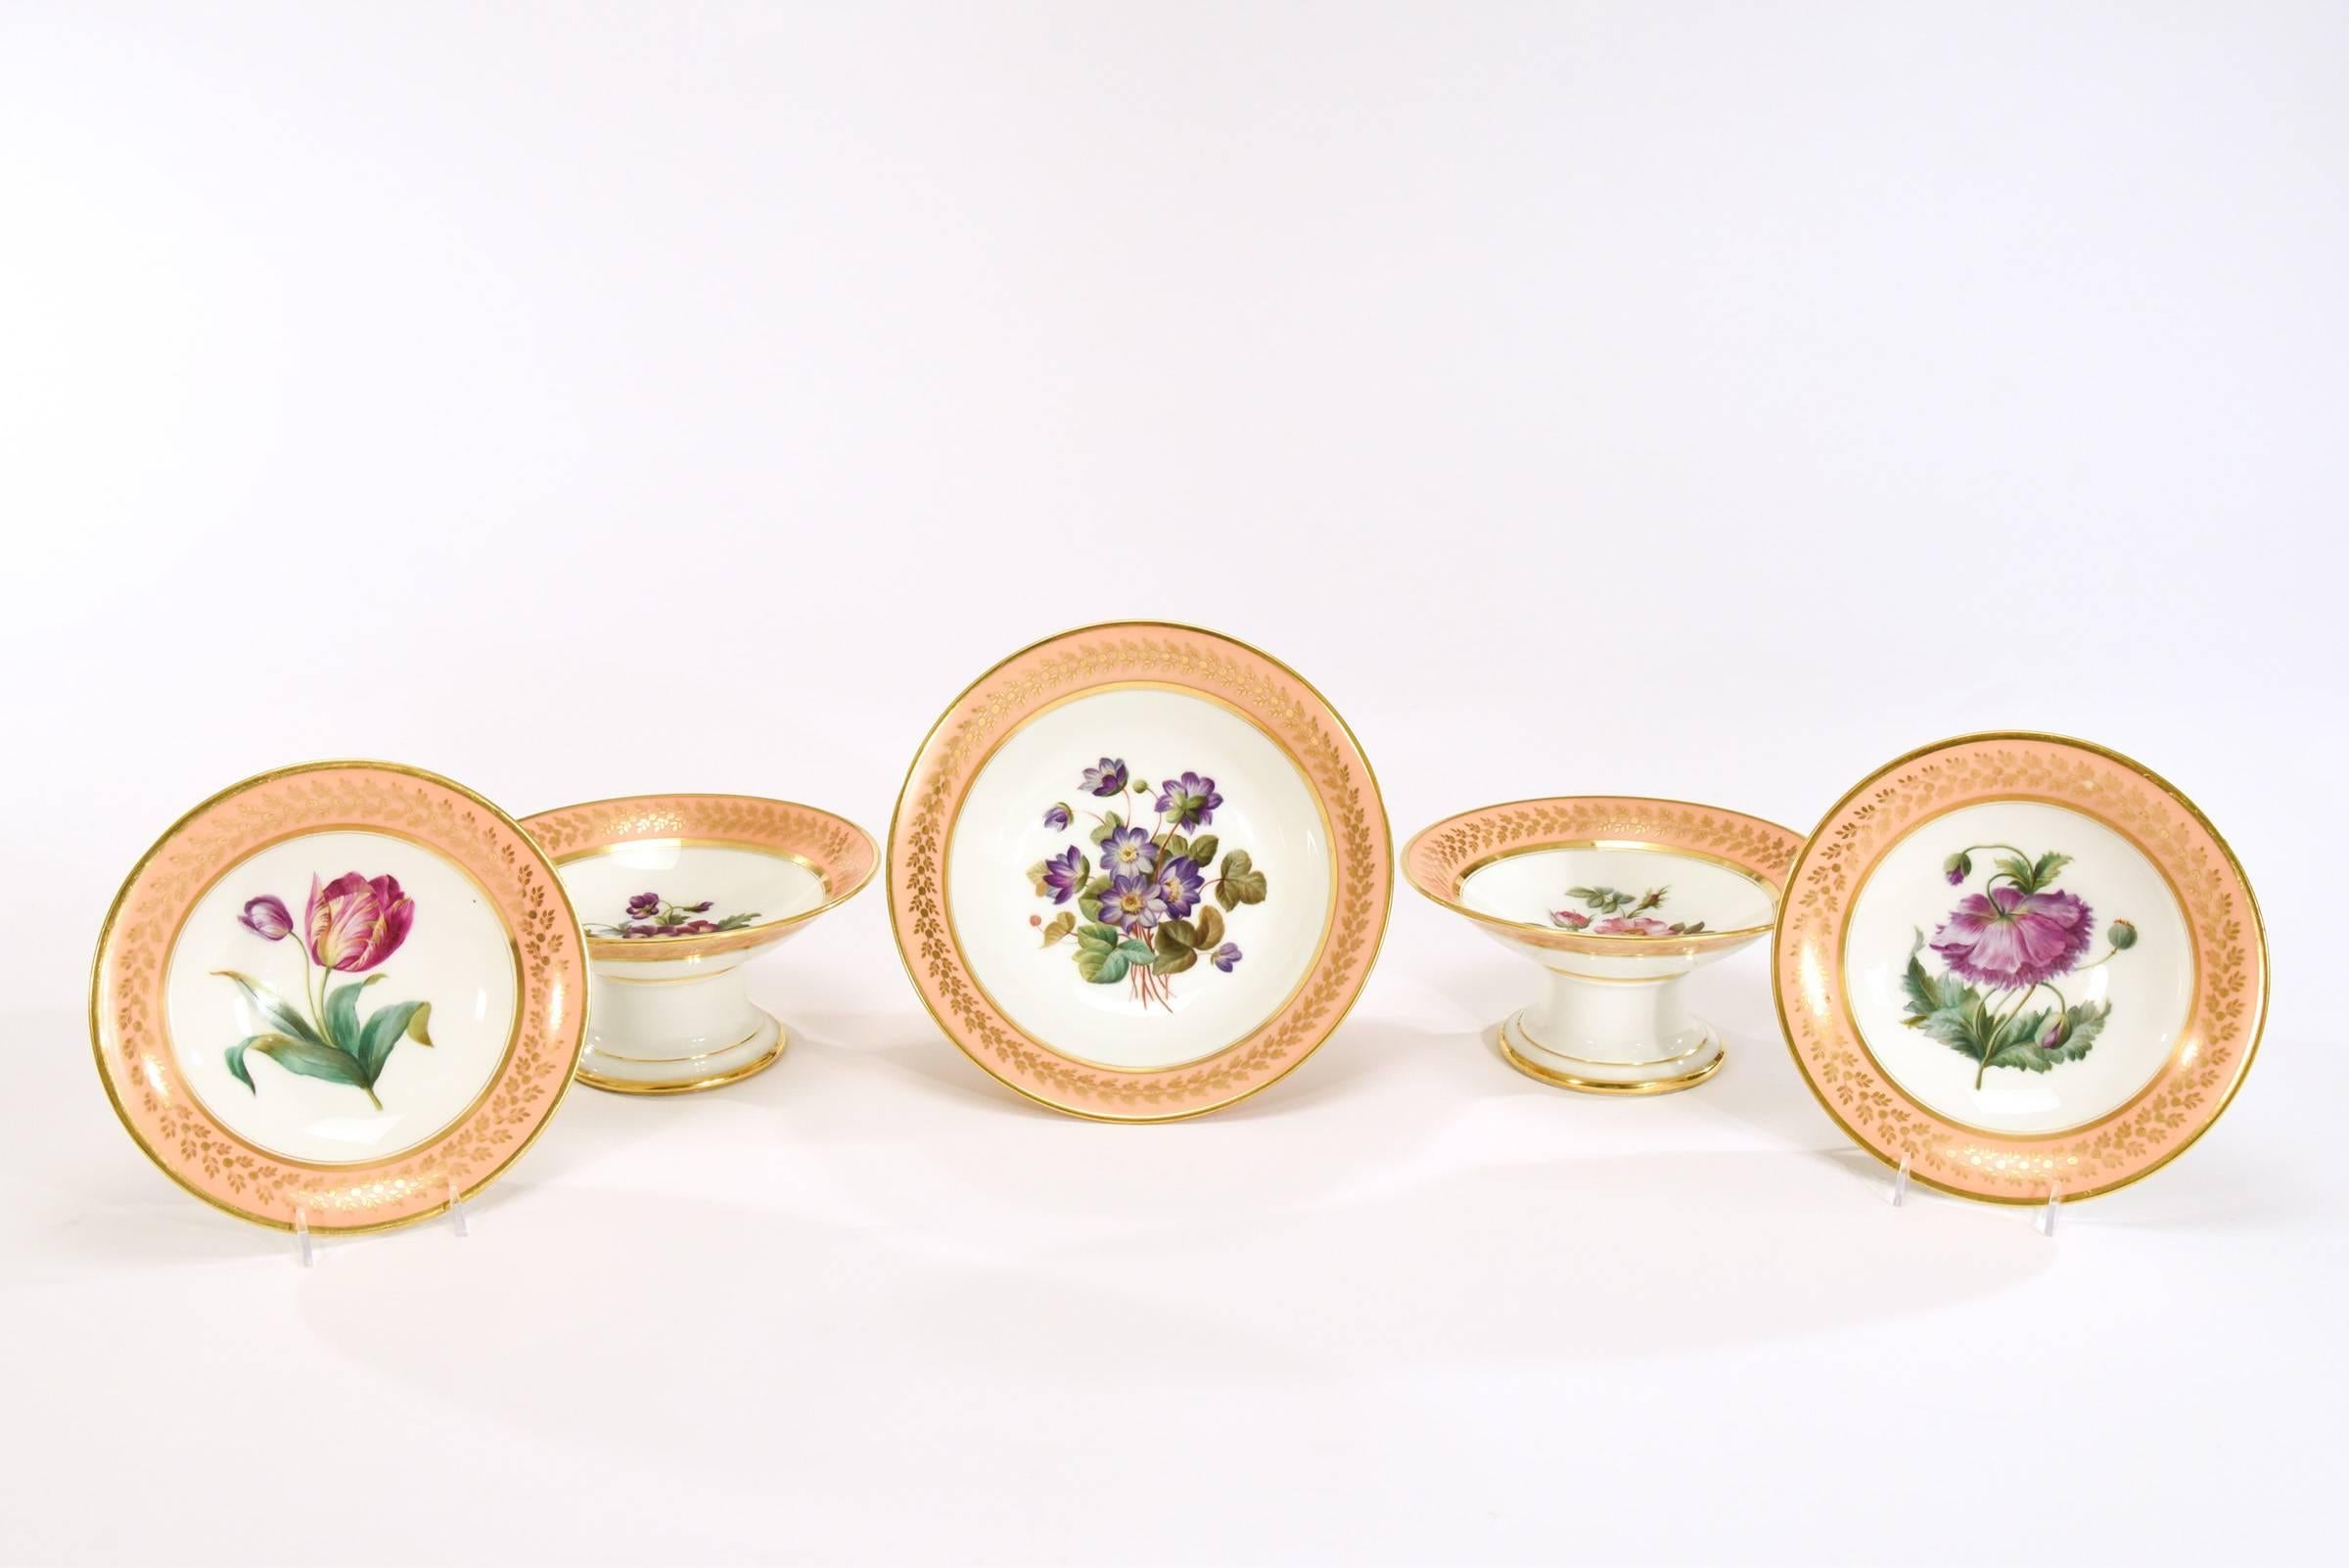 15-Piece Old Paris Dagoty Hand-Painted Botanical Peach and Gold Dessert Set In Excellent Condition For Sale In Great Barrington, MA